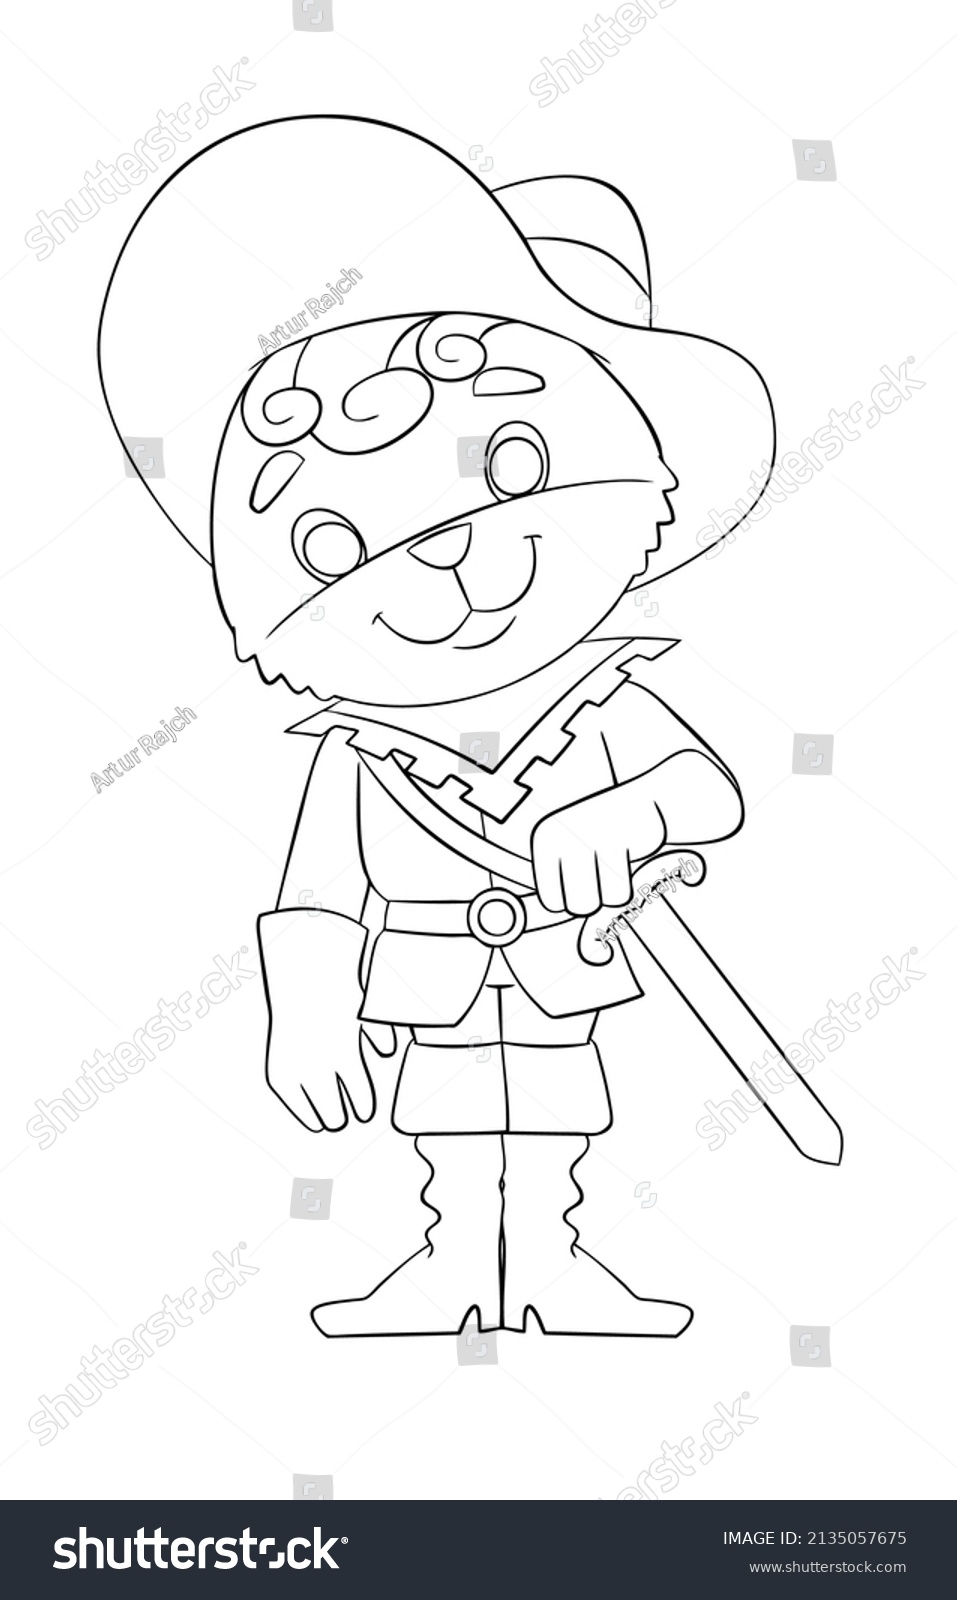 Puss boots element coloring page cartoon stock vector royalty free